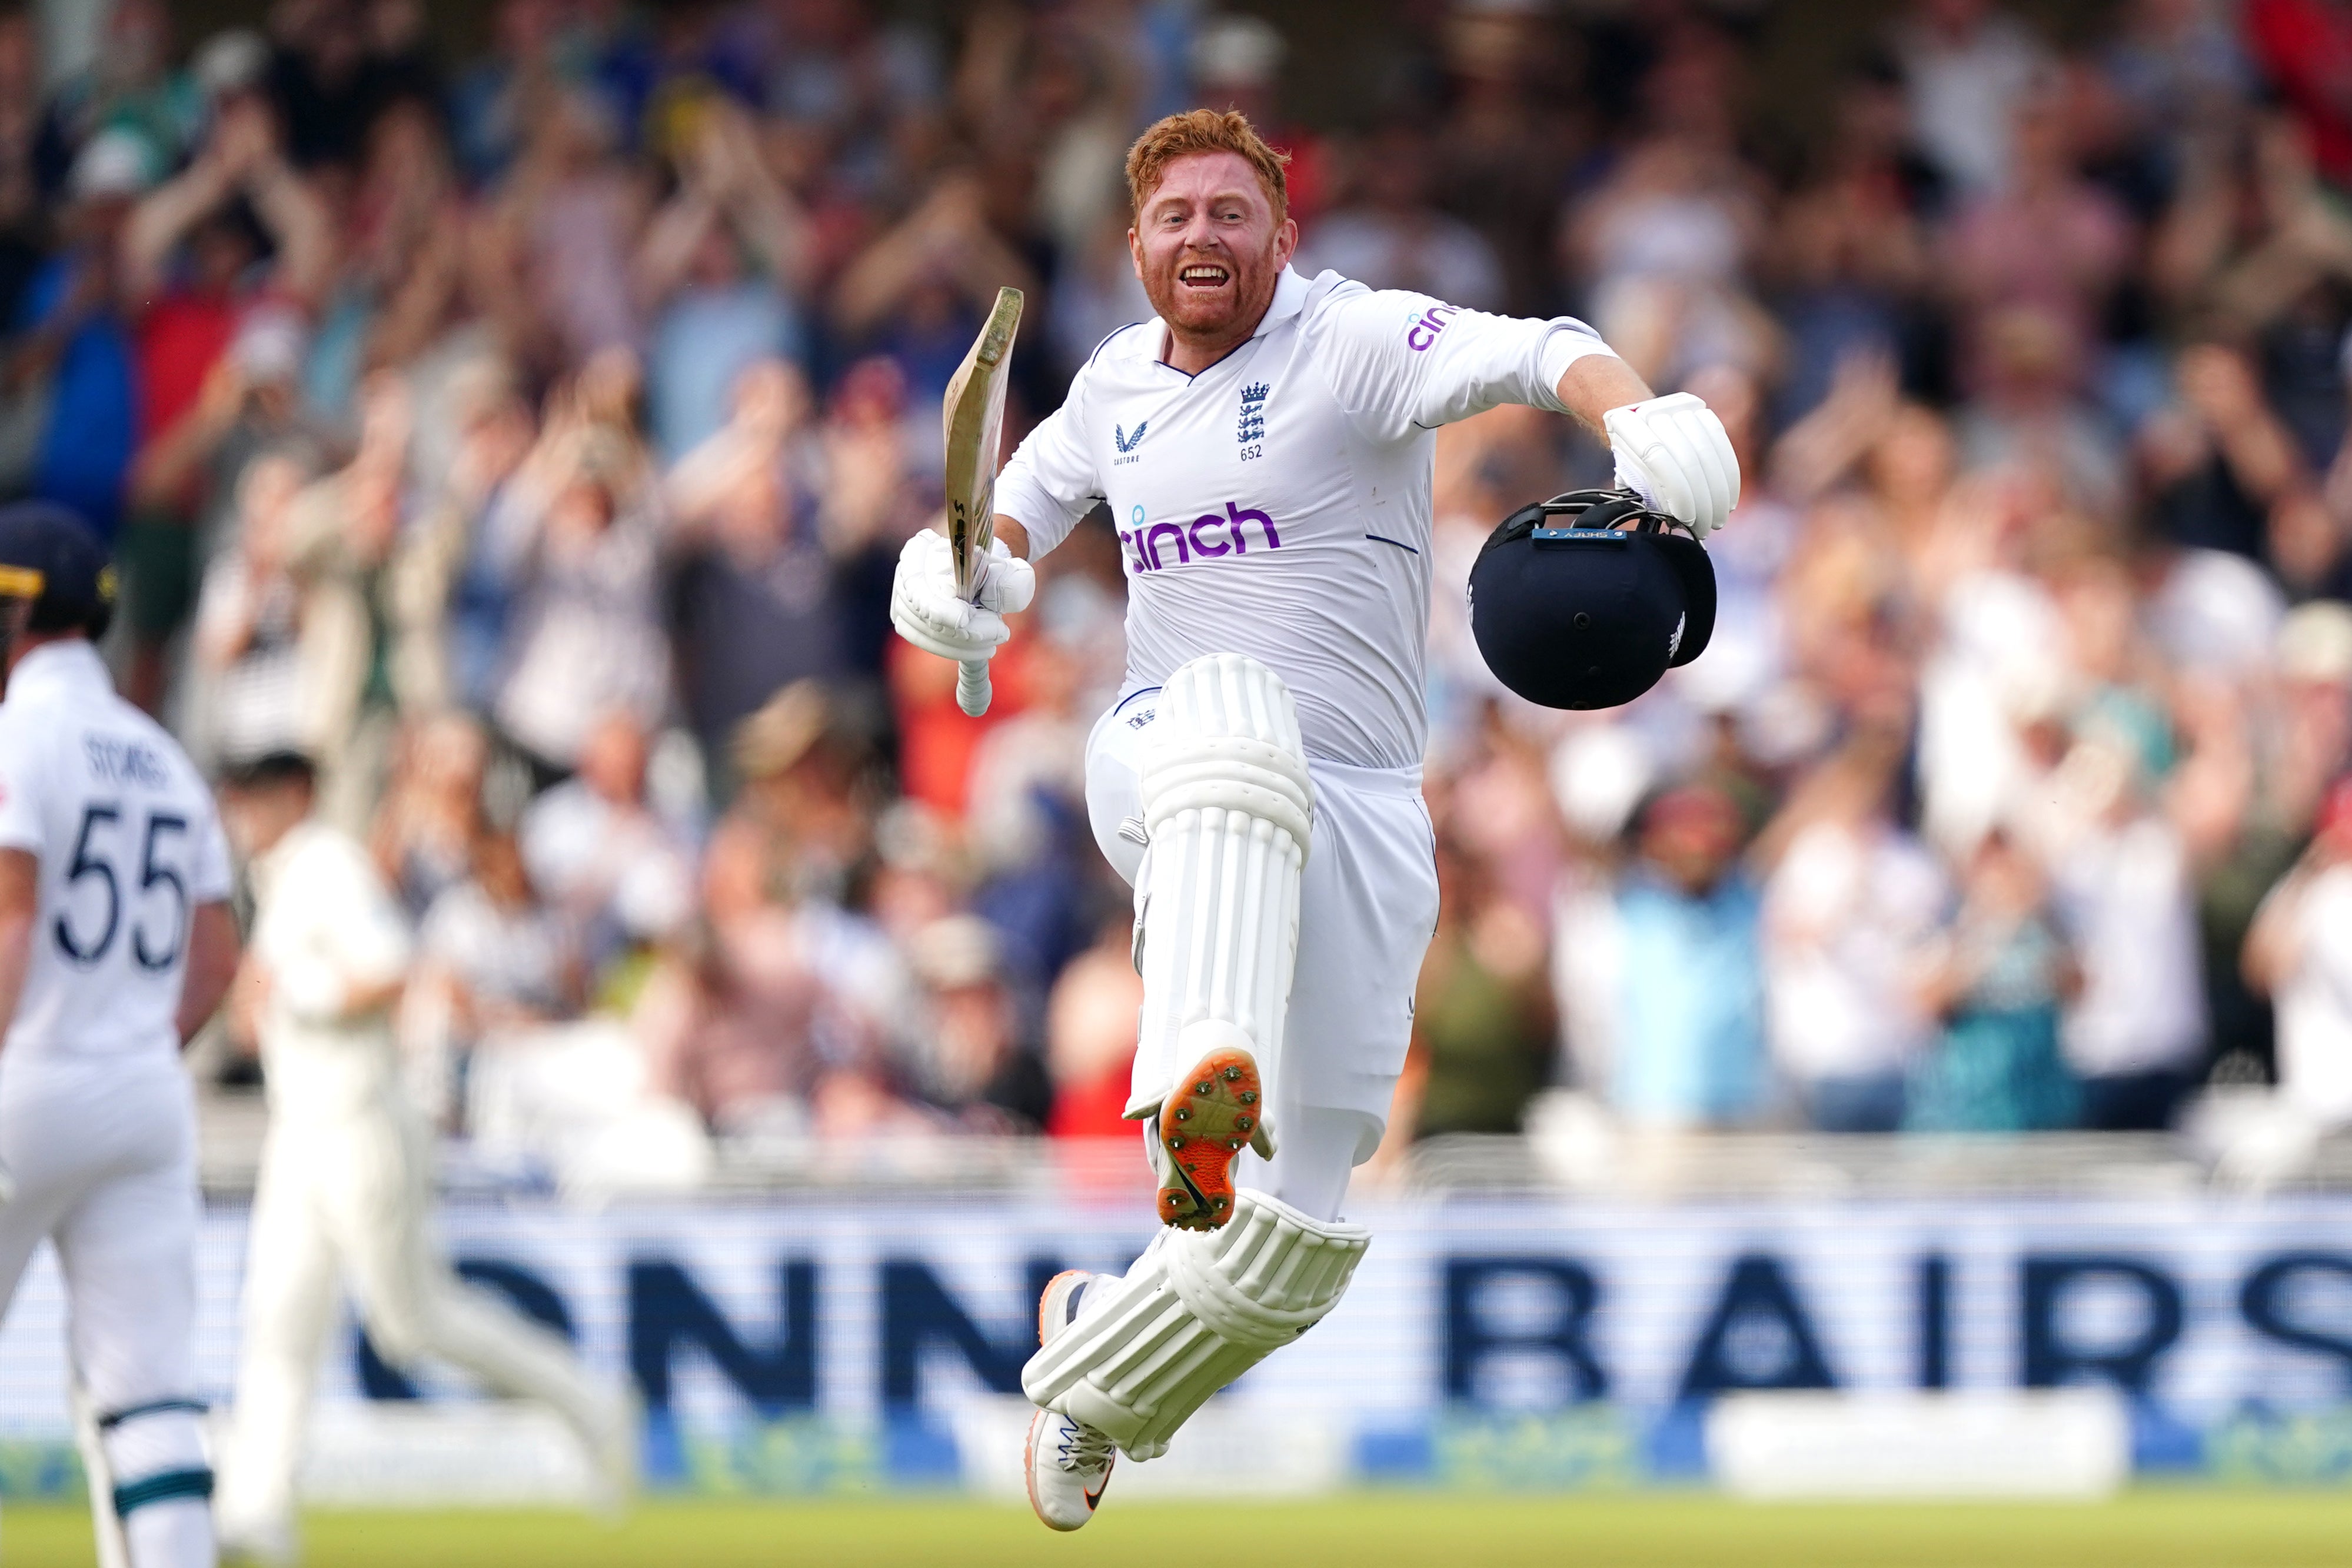 Jonny Bairstow starred for England (Mike Egerton/PA)